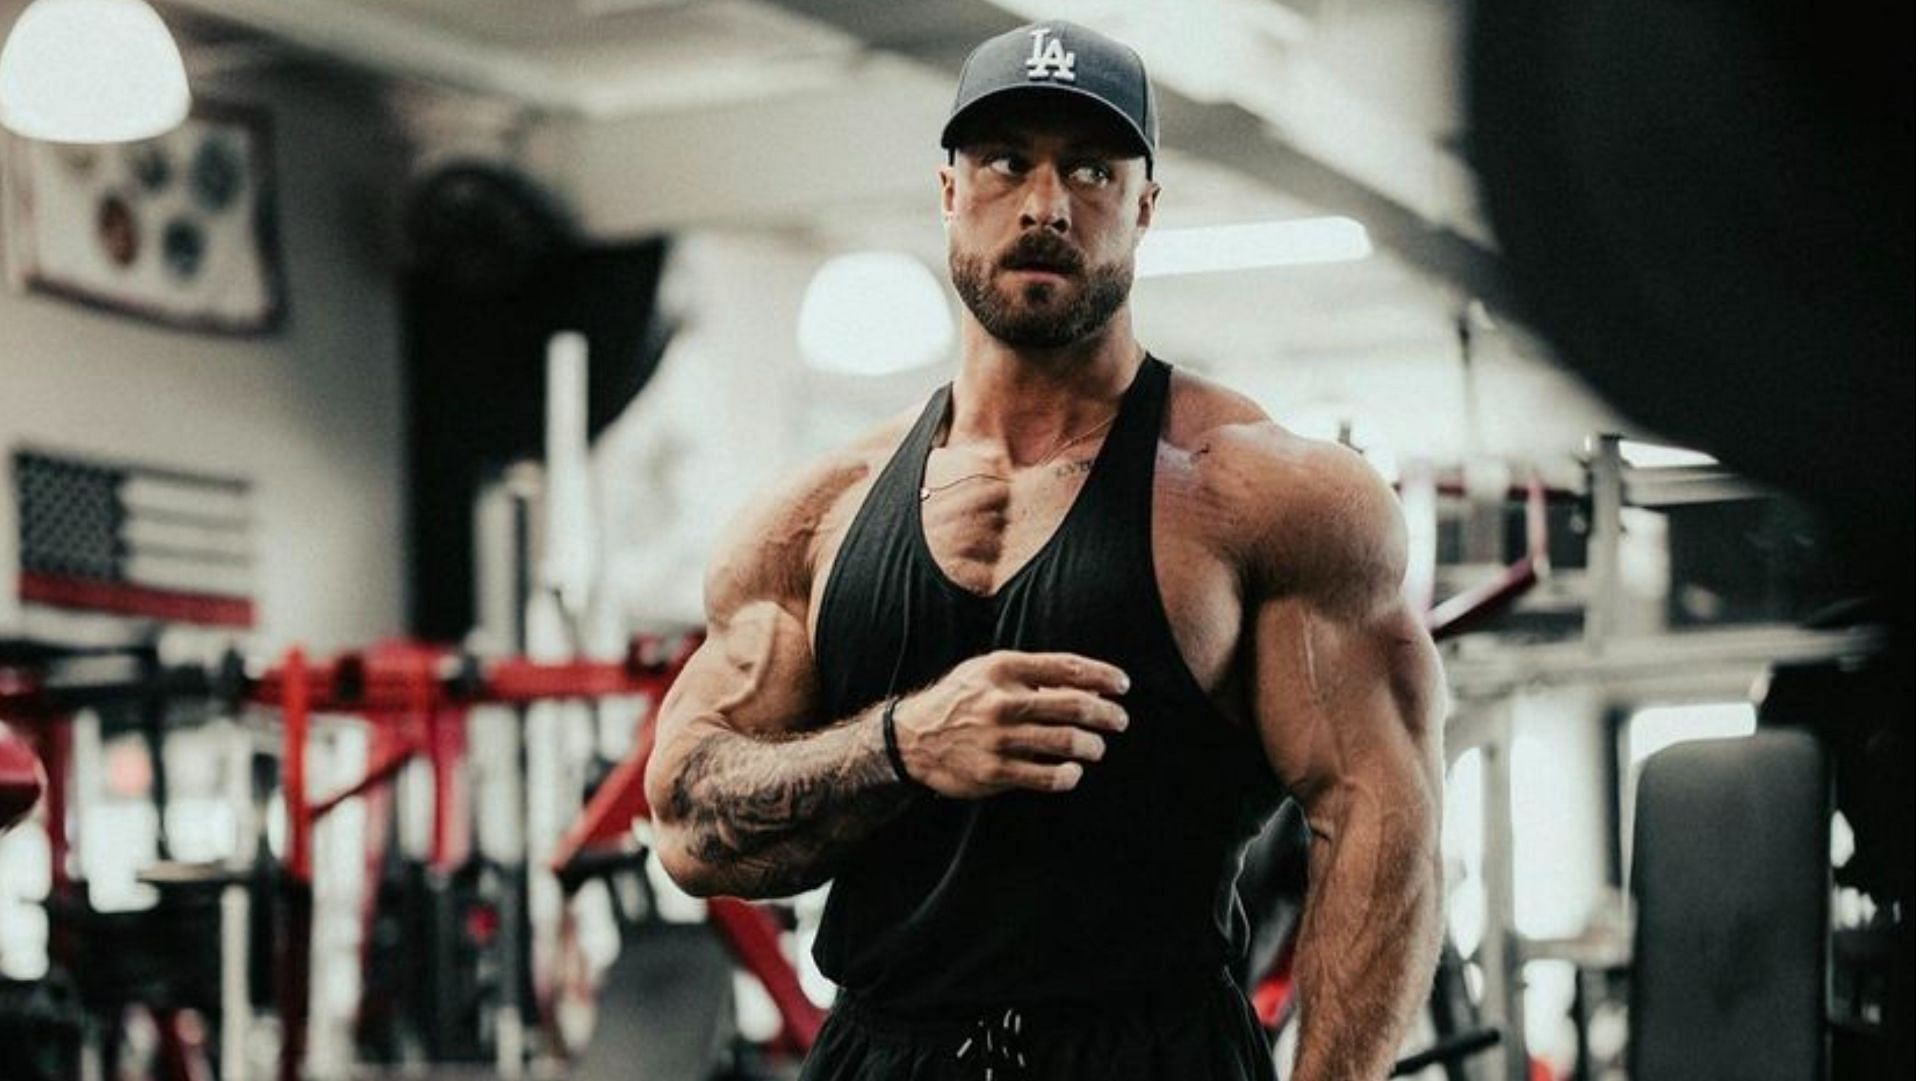 Exercises to get triceps like Chris Bumstead. (Photo via Instagram/cbum)